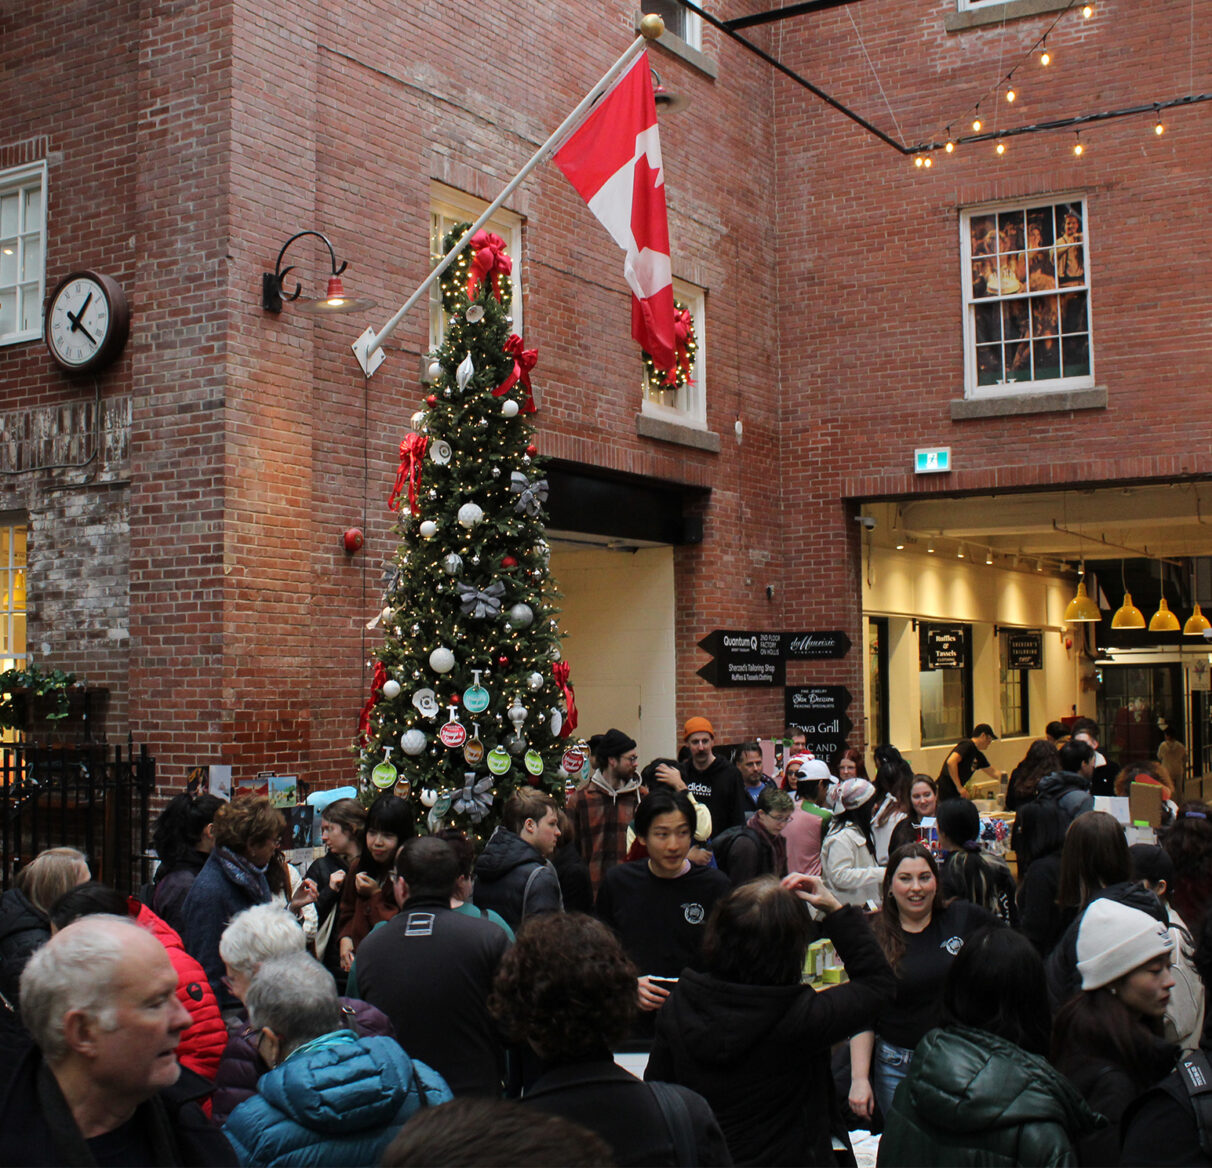 A crowd of people in a room standing under a Christmas tree and Canadian flag.